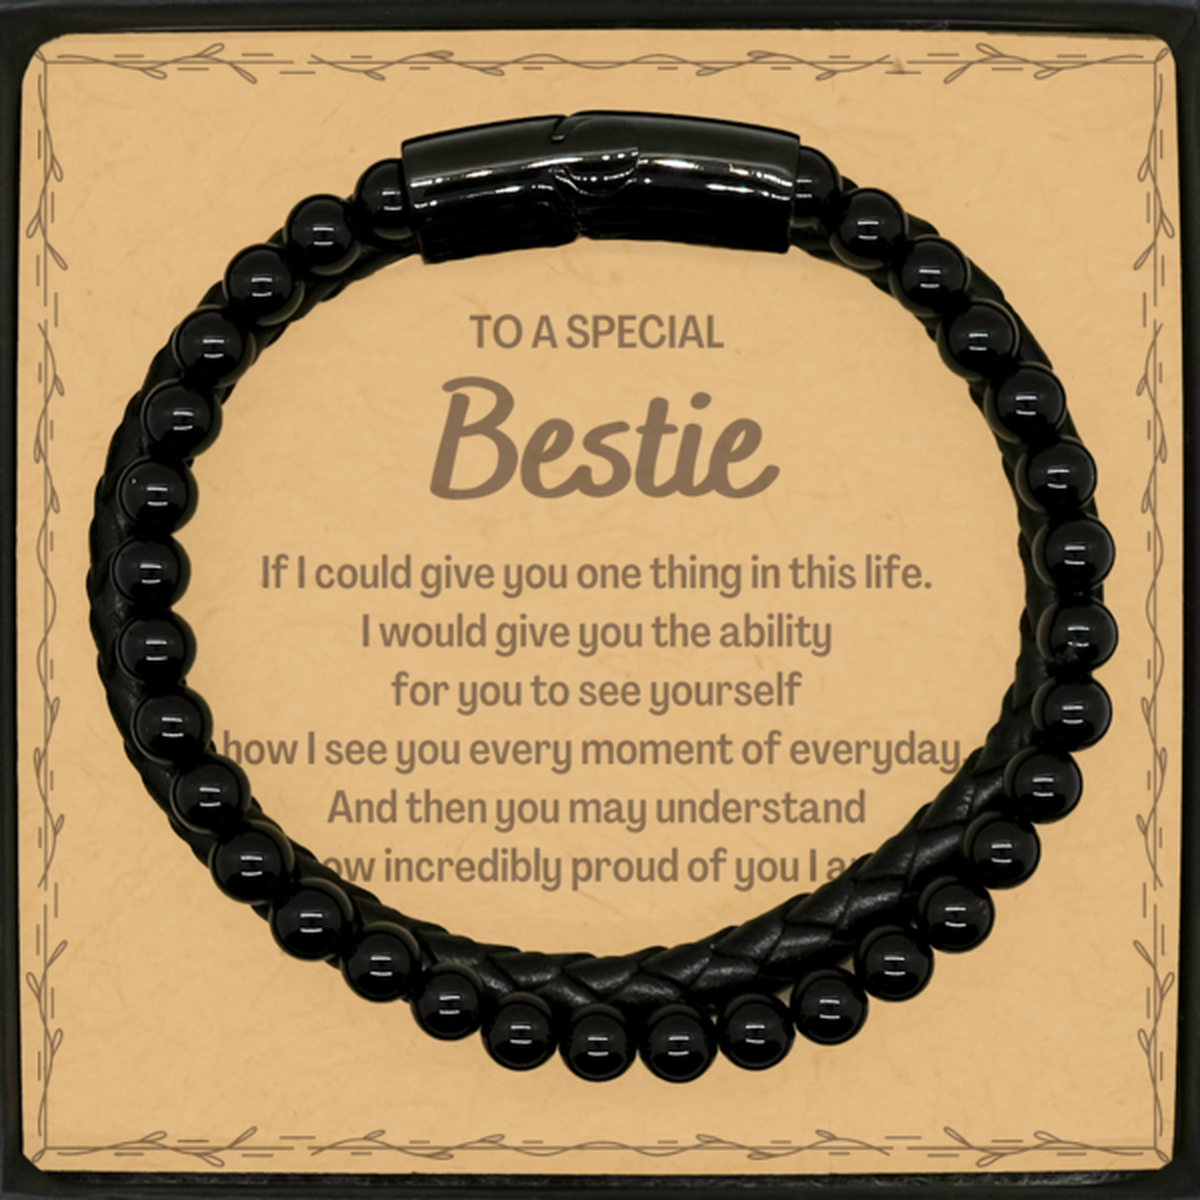 To My Bestie Stone Leather Bracelets, Gifts For Bestie Message Card, Inspirational Gifts for Christmas Birthday, Epic Gifts for Bestie To A Special Bestie how incredibly proud of you I am